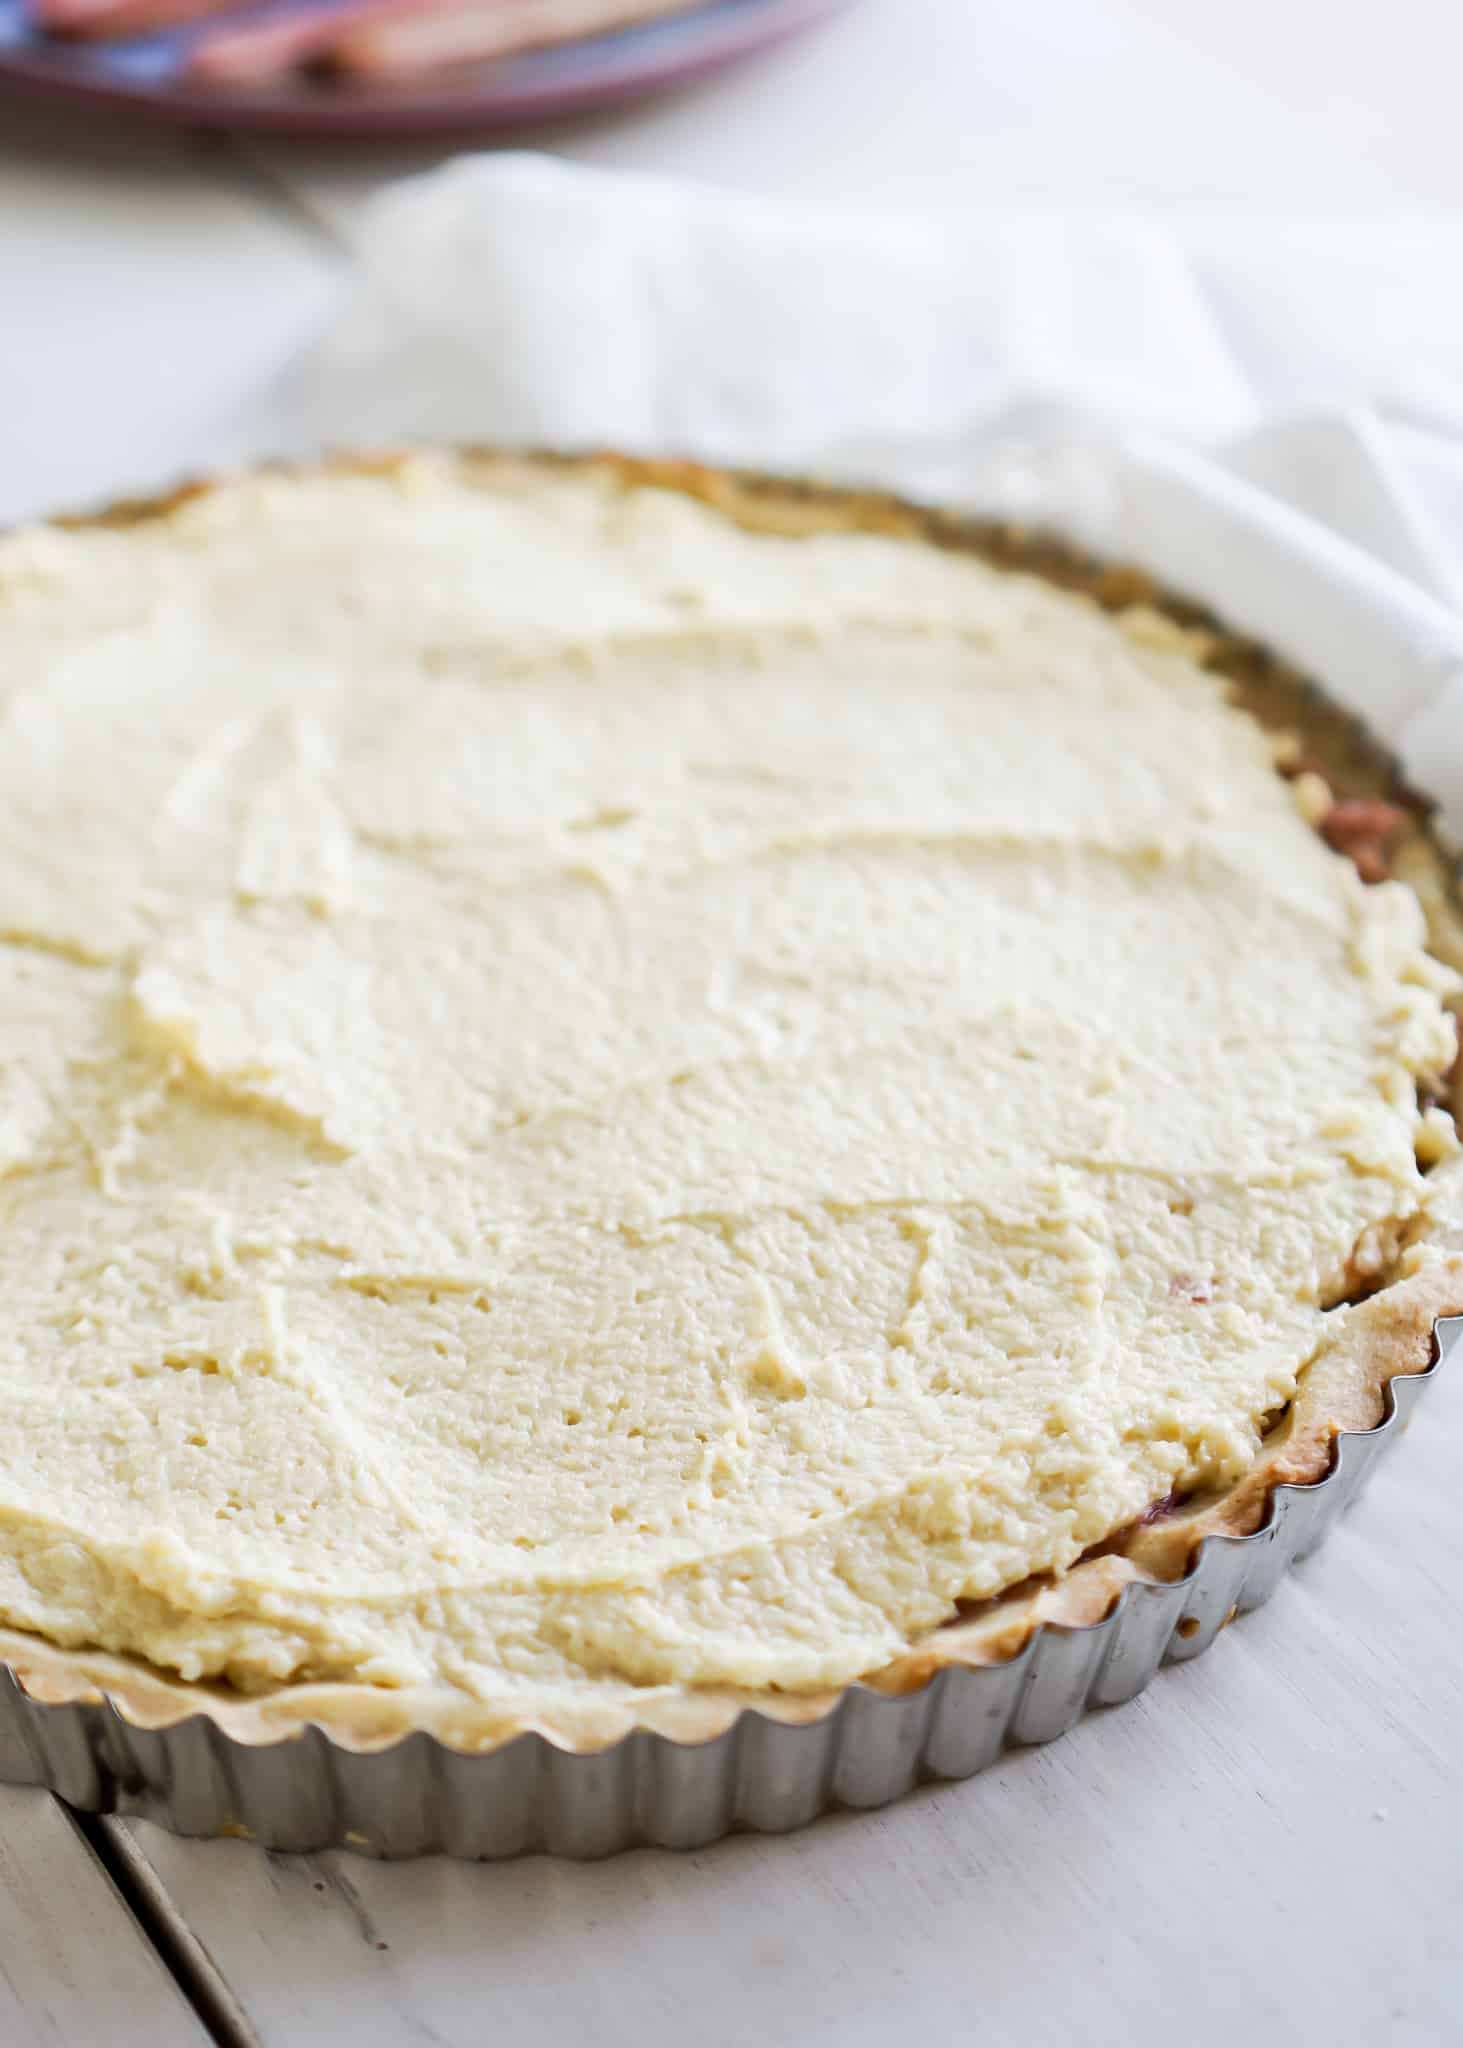 Rhubarb Almond Tart-top with almond filling